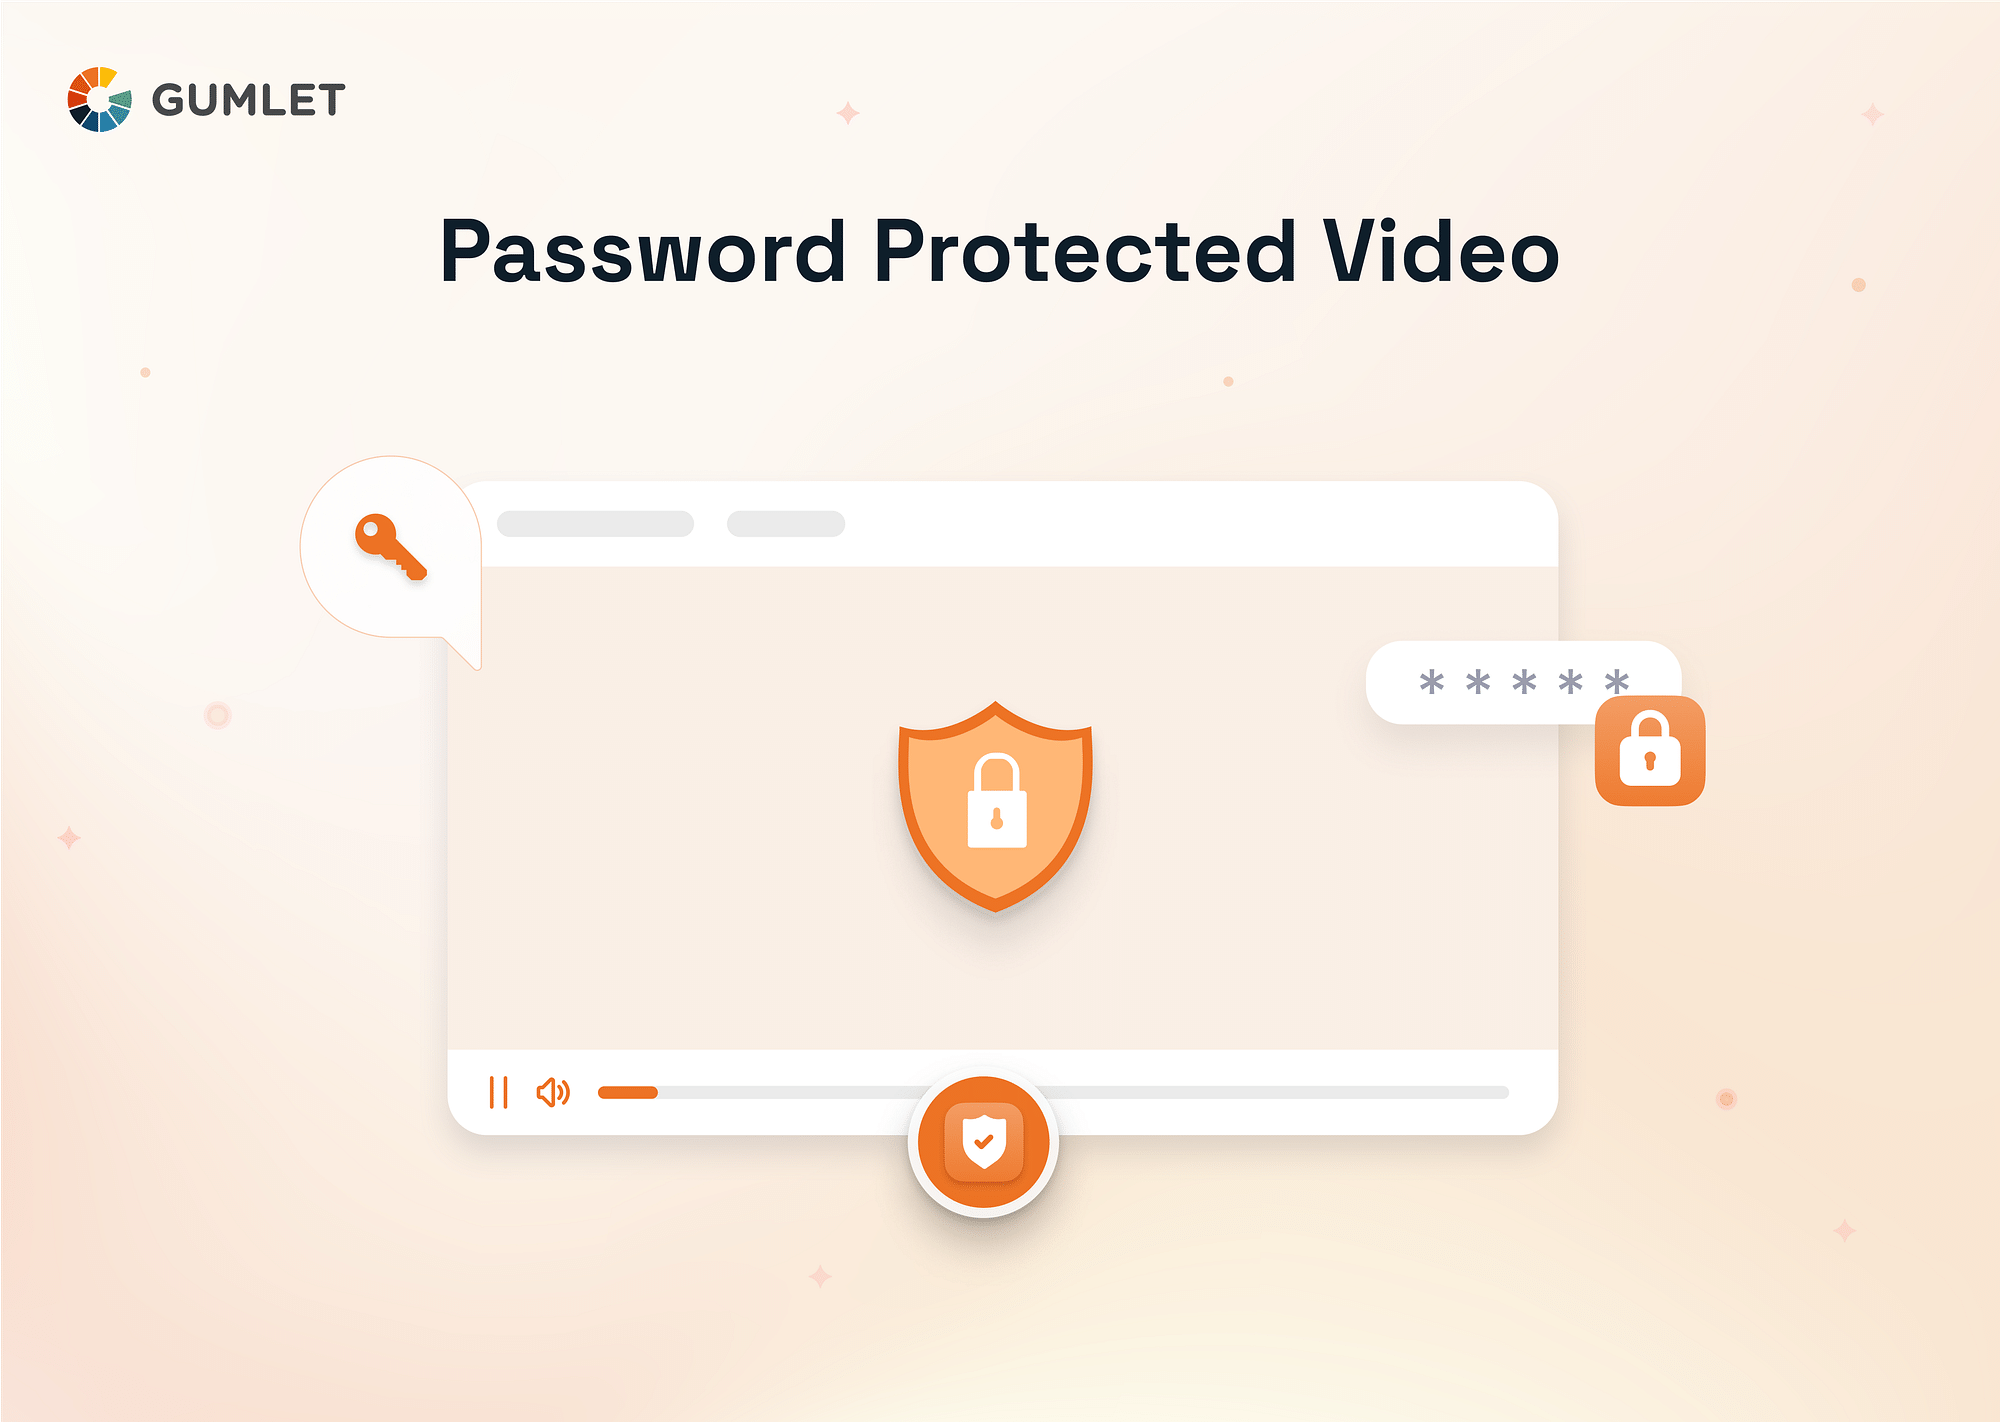 How to enable password protection for your videos?